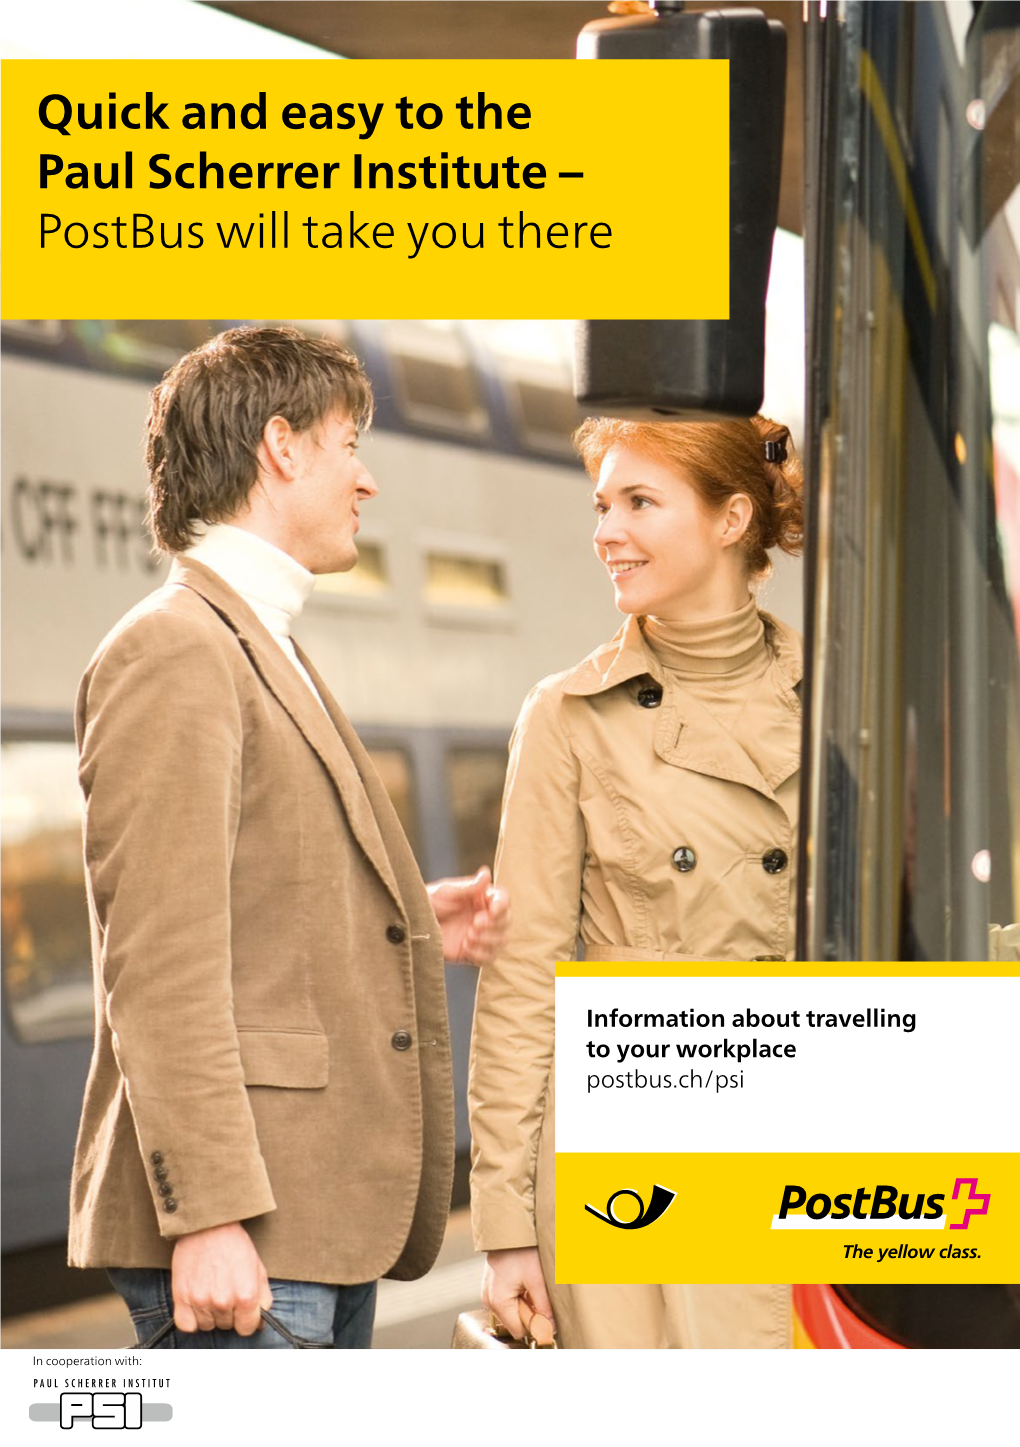 Quick and Easy to the Paul Scherrer Institute – Postbus Will Take You There